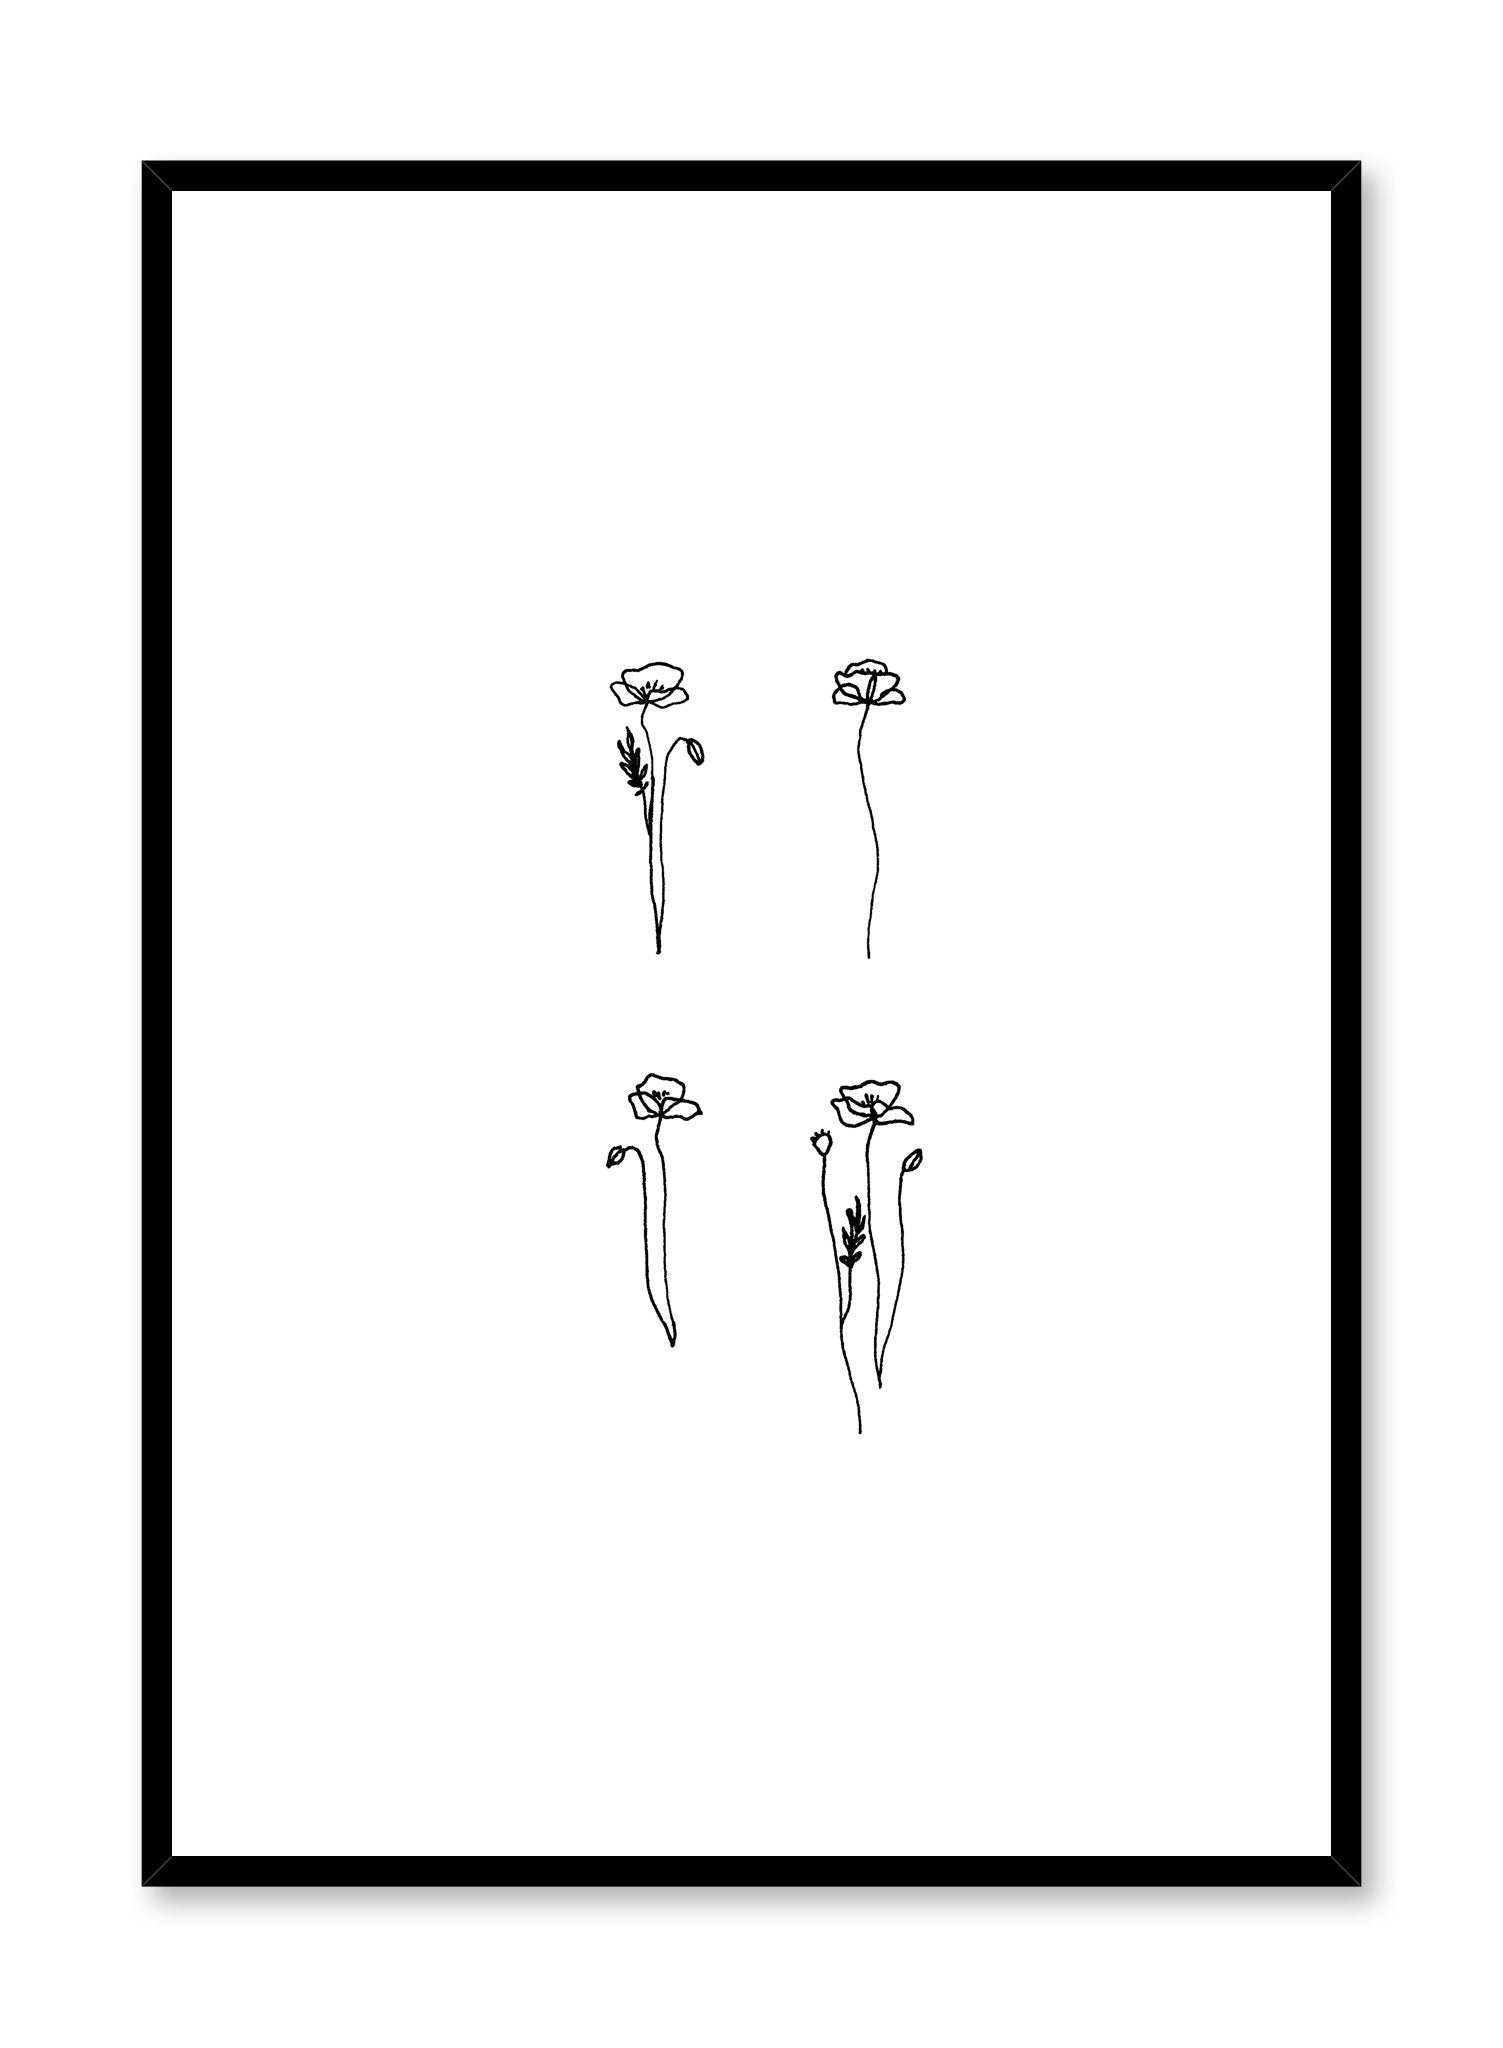 Modern minimalist poster by Opposite Wall with abstract line art illustration of Together and Alone